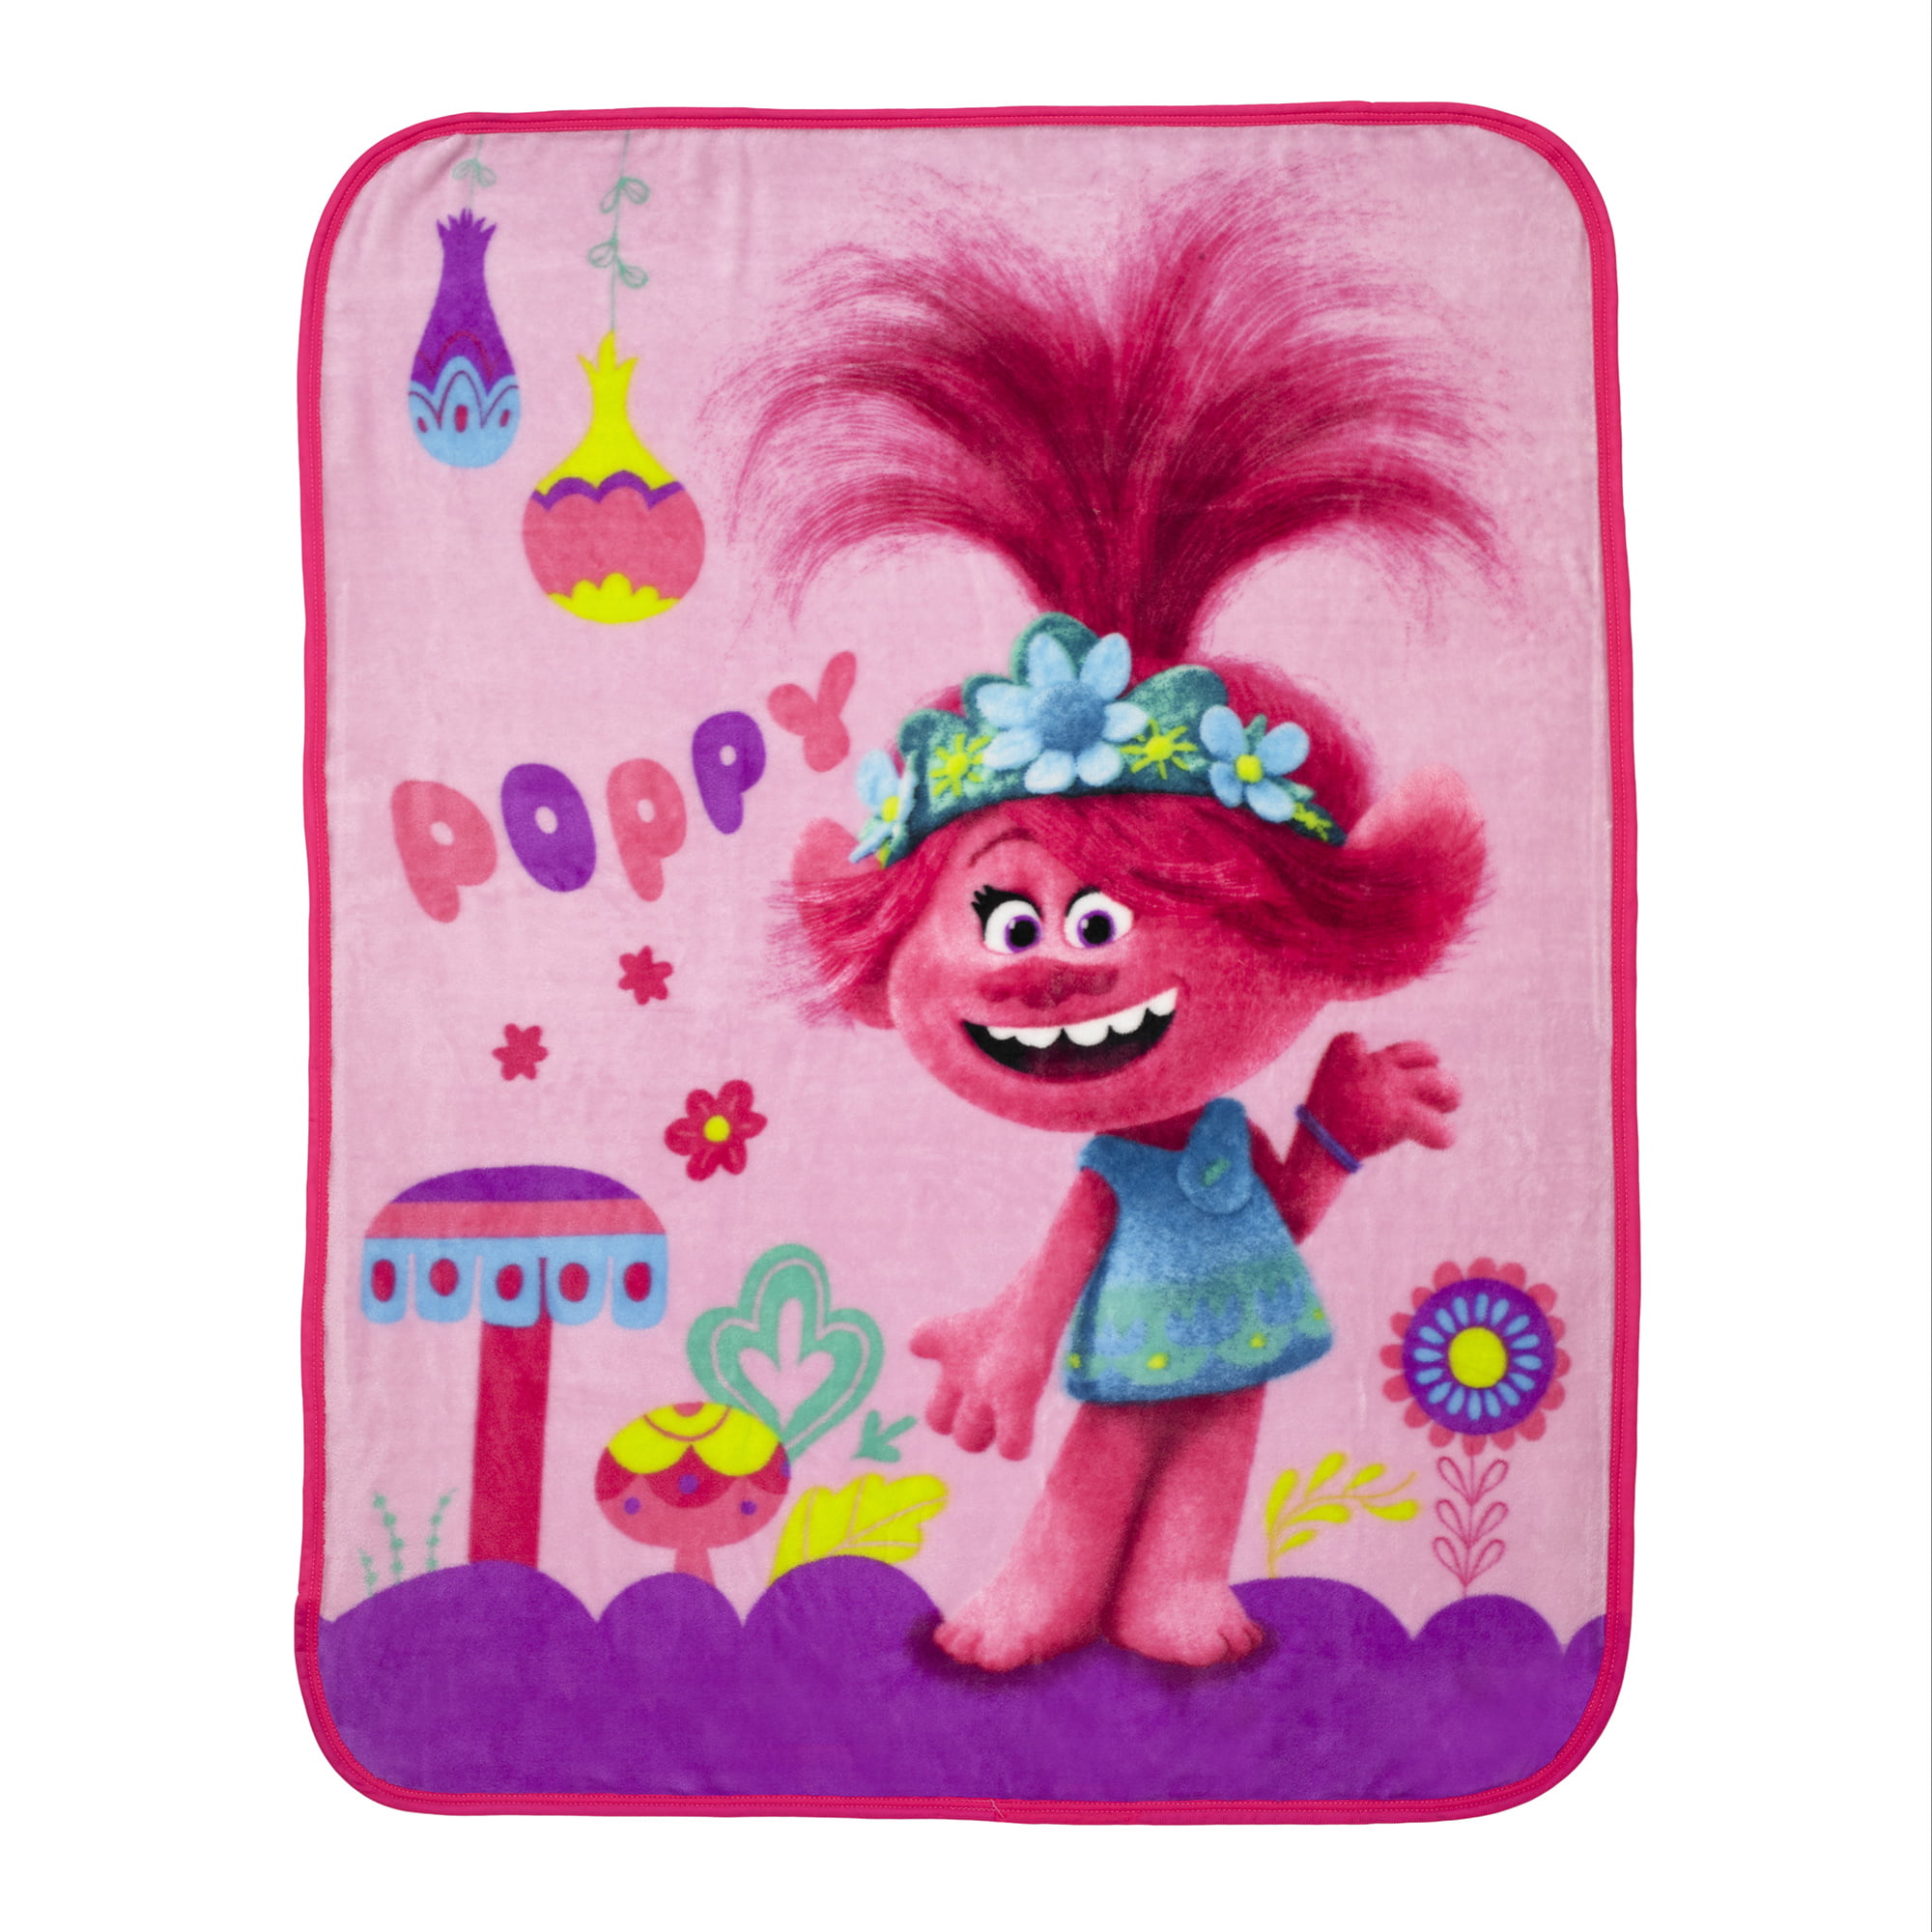 3 or 4 piece Sets OR 2 TROLLS with POPPY "Smile" KINDERMAT Cover 